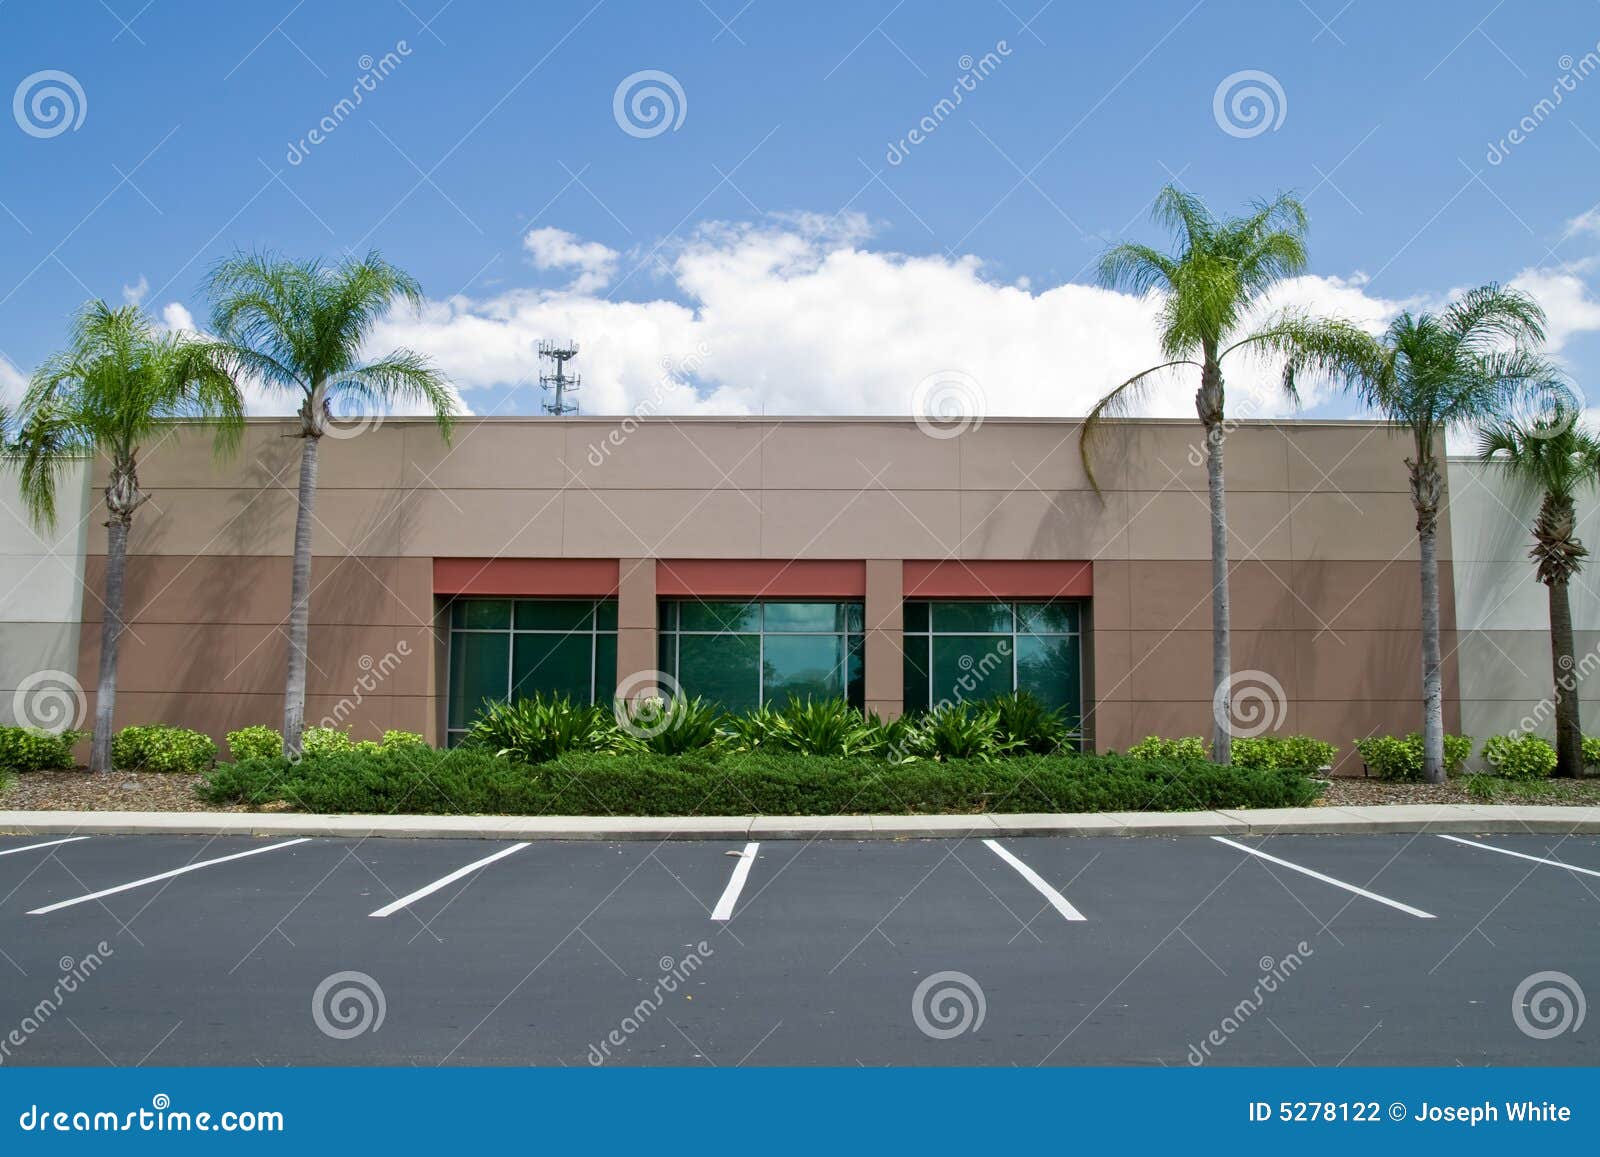 office building with parking spaces